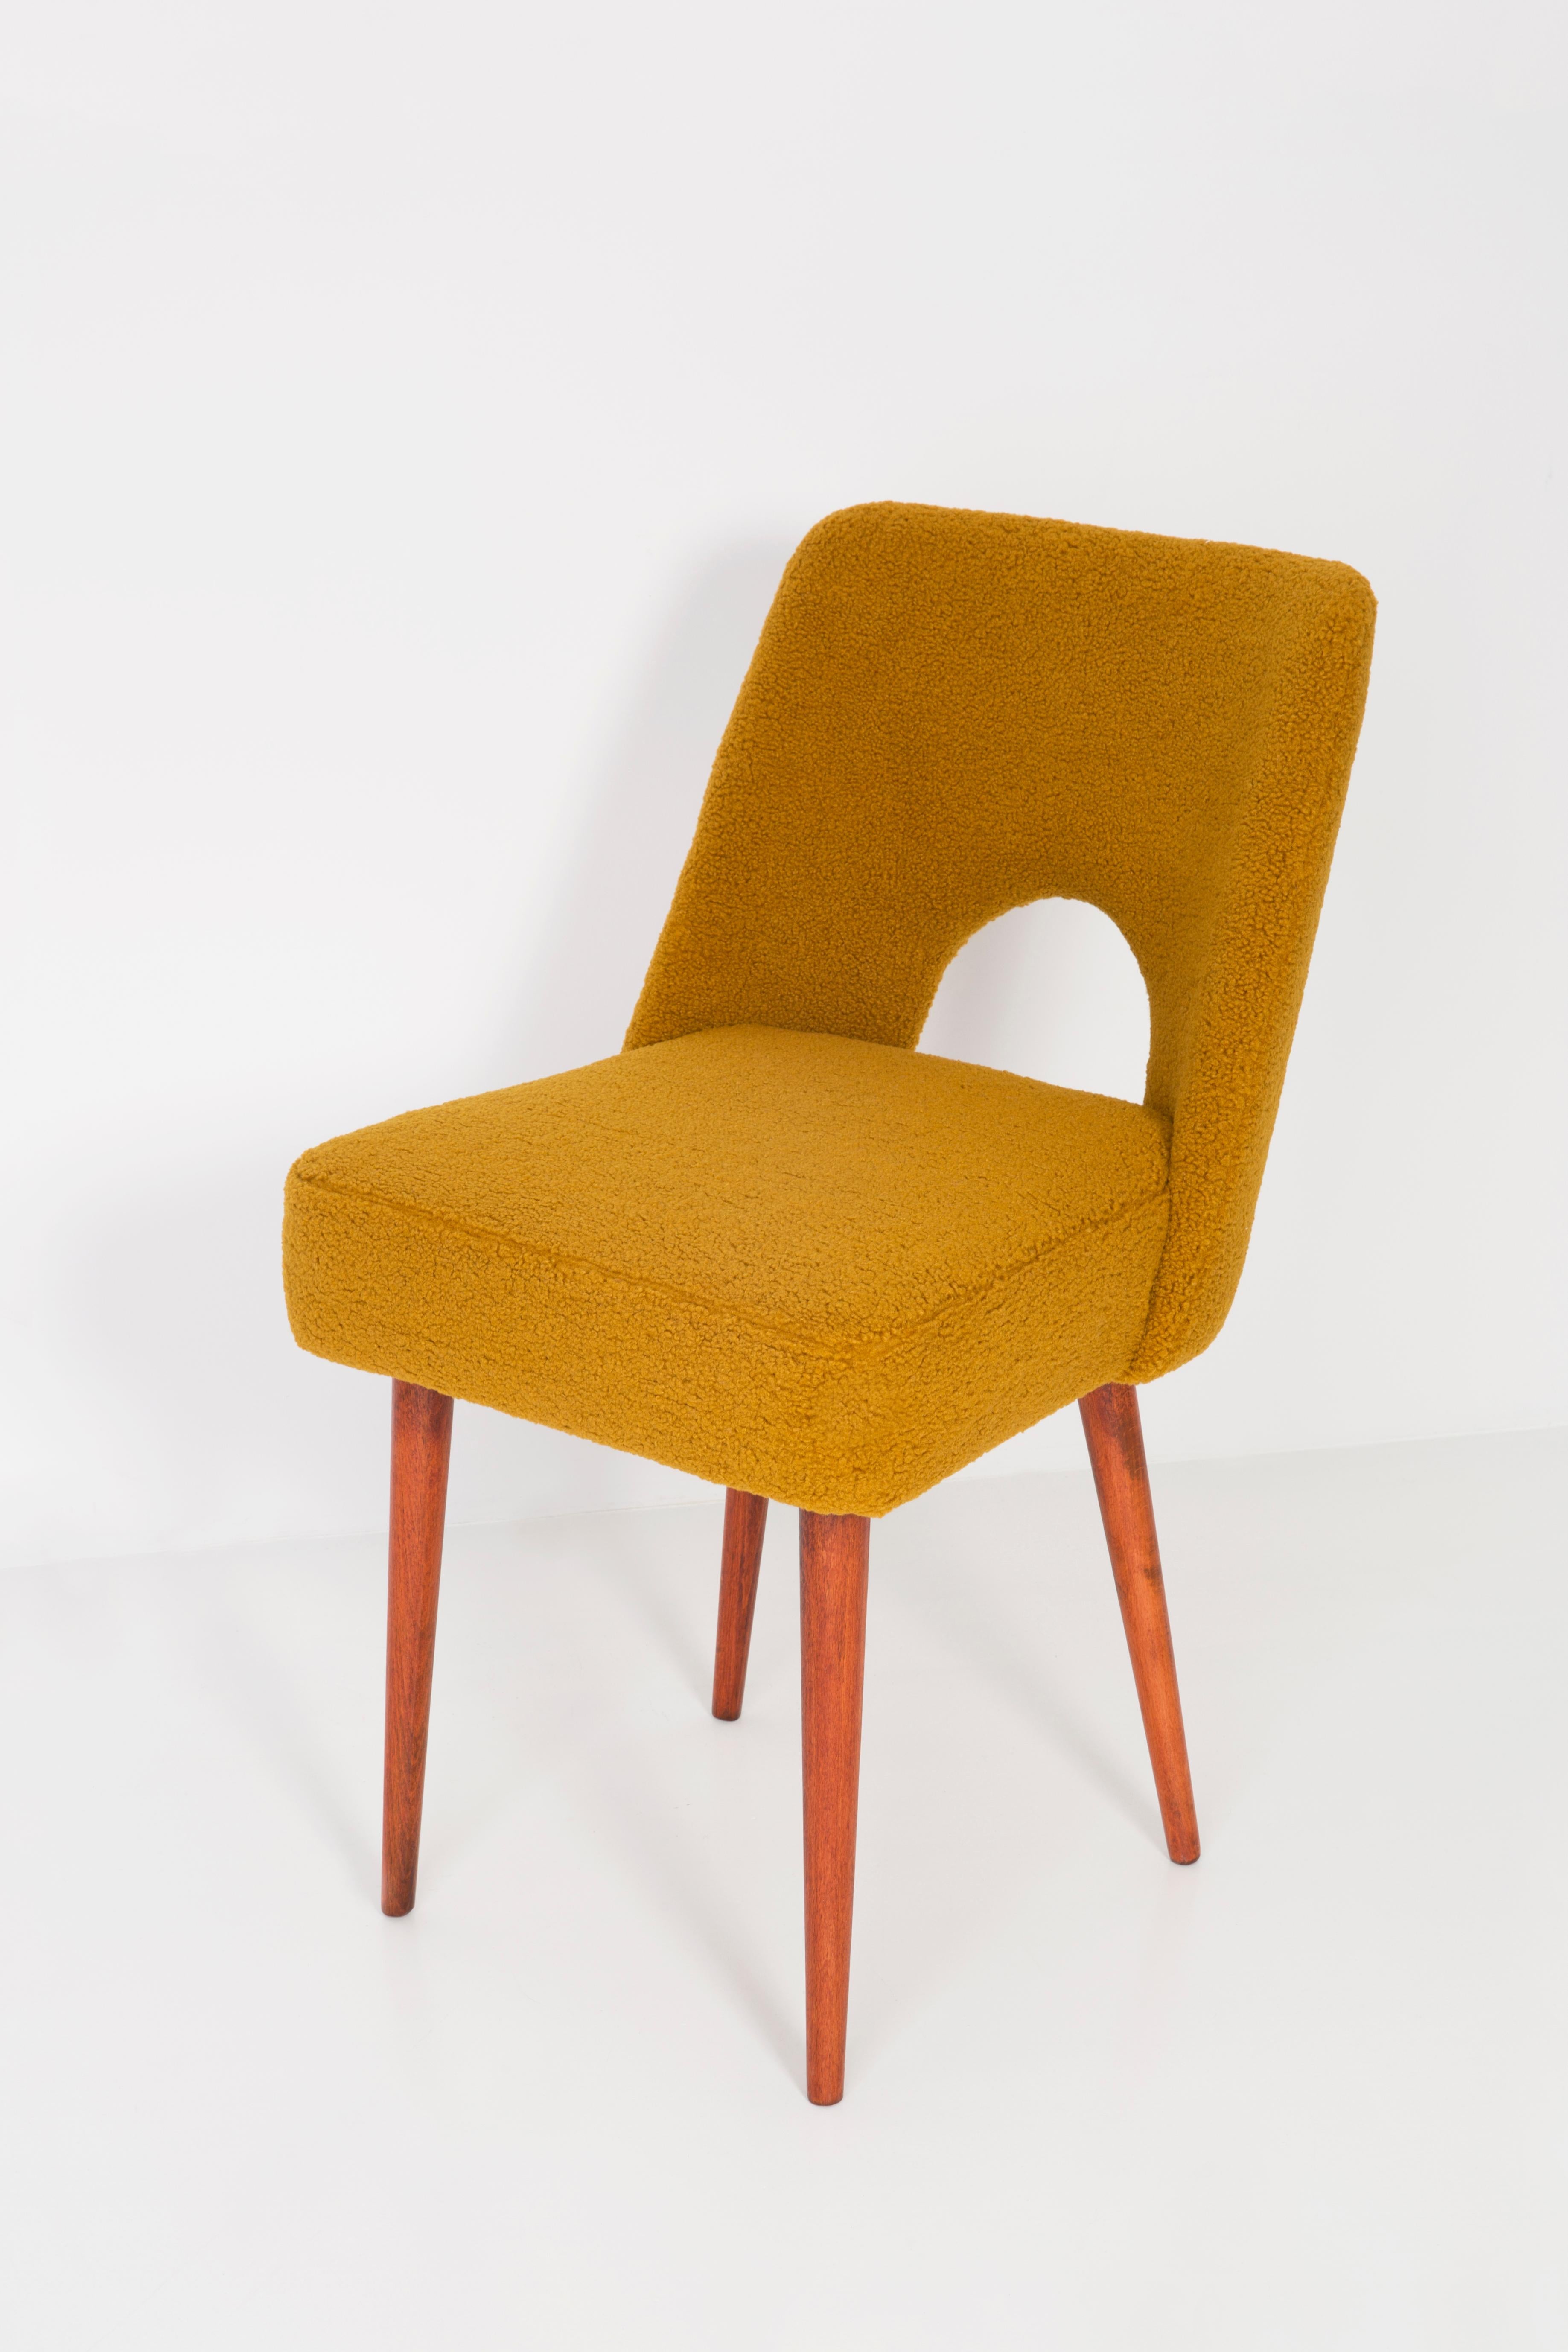 Textile Set of Two Yellow Ochre Boucle 'Shell' Chairs, 1960s For Sale